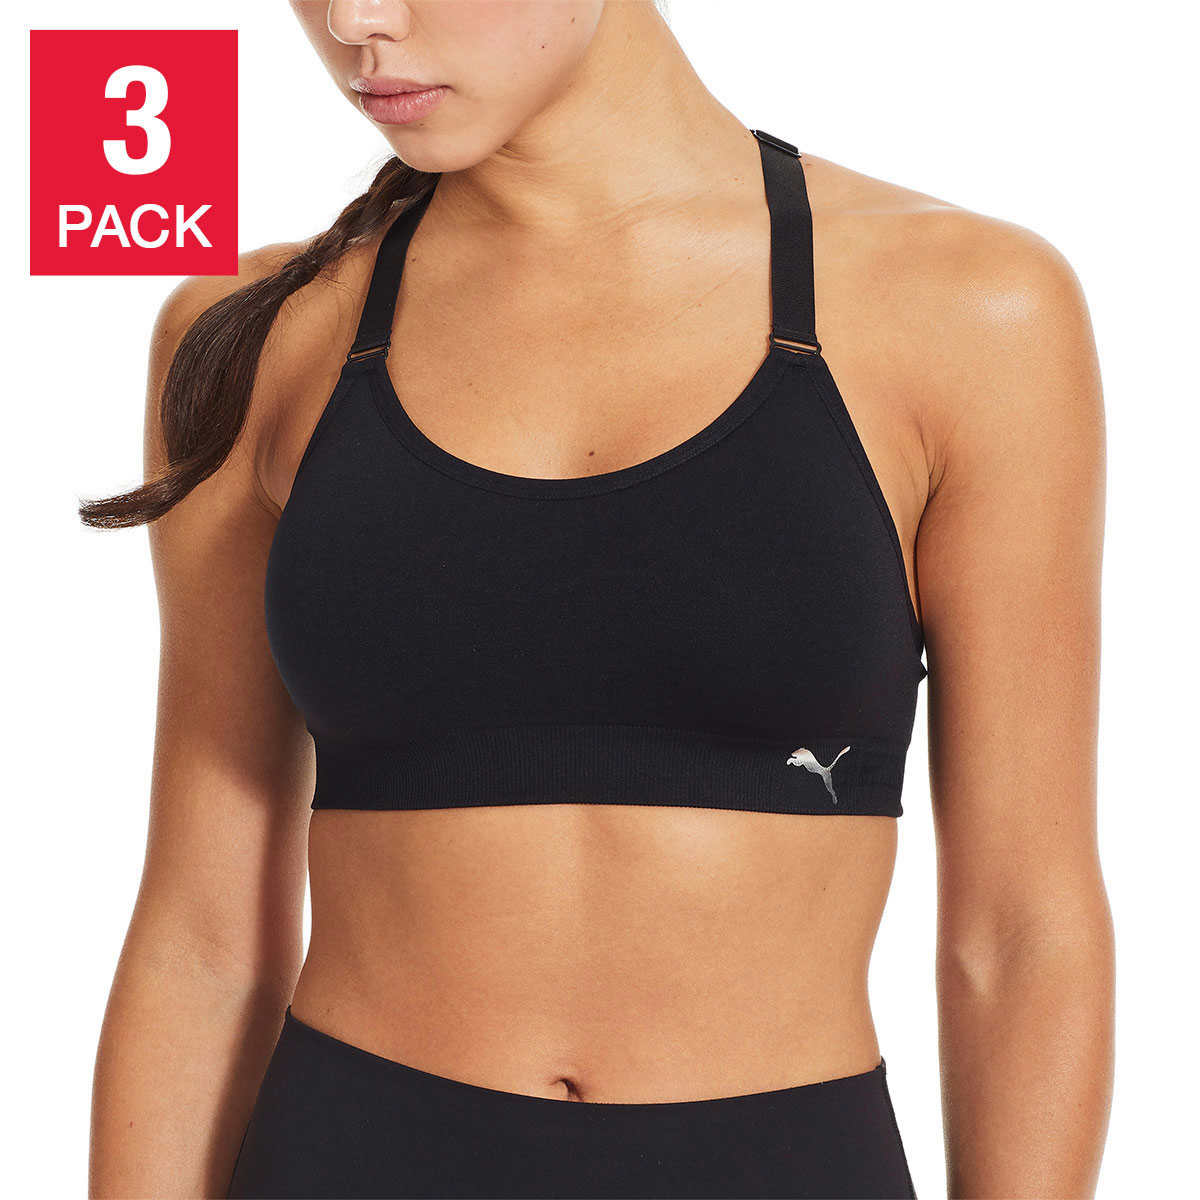 2 in a pack Puma sport bra Size M (New and unopen in box)